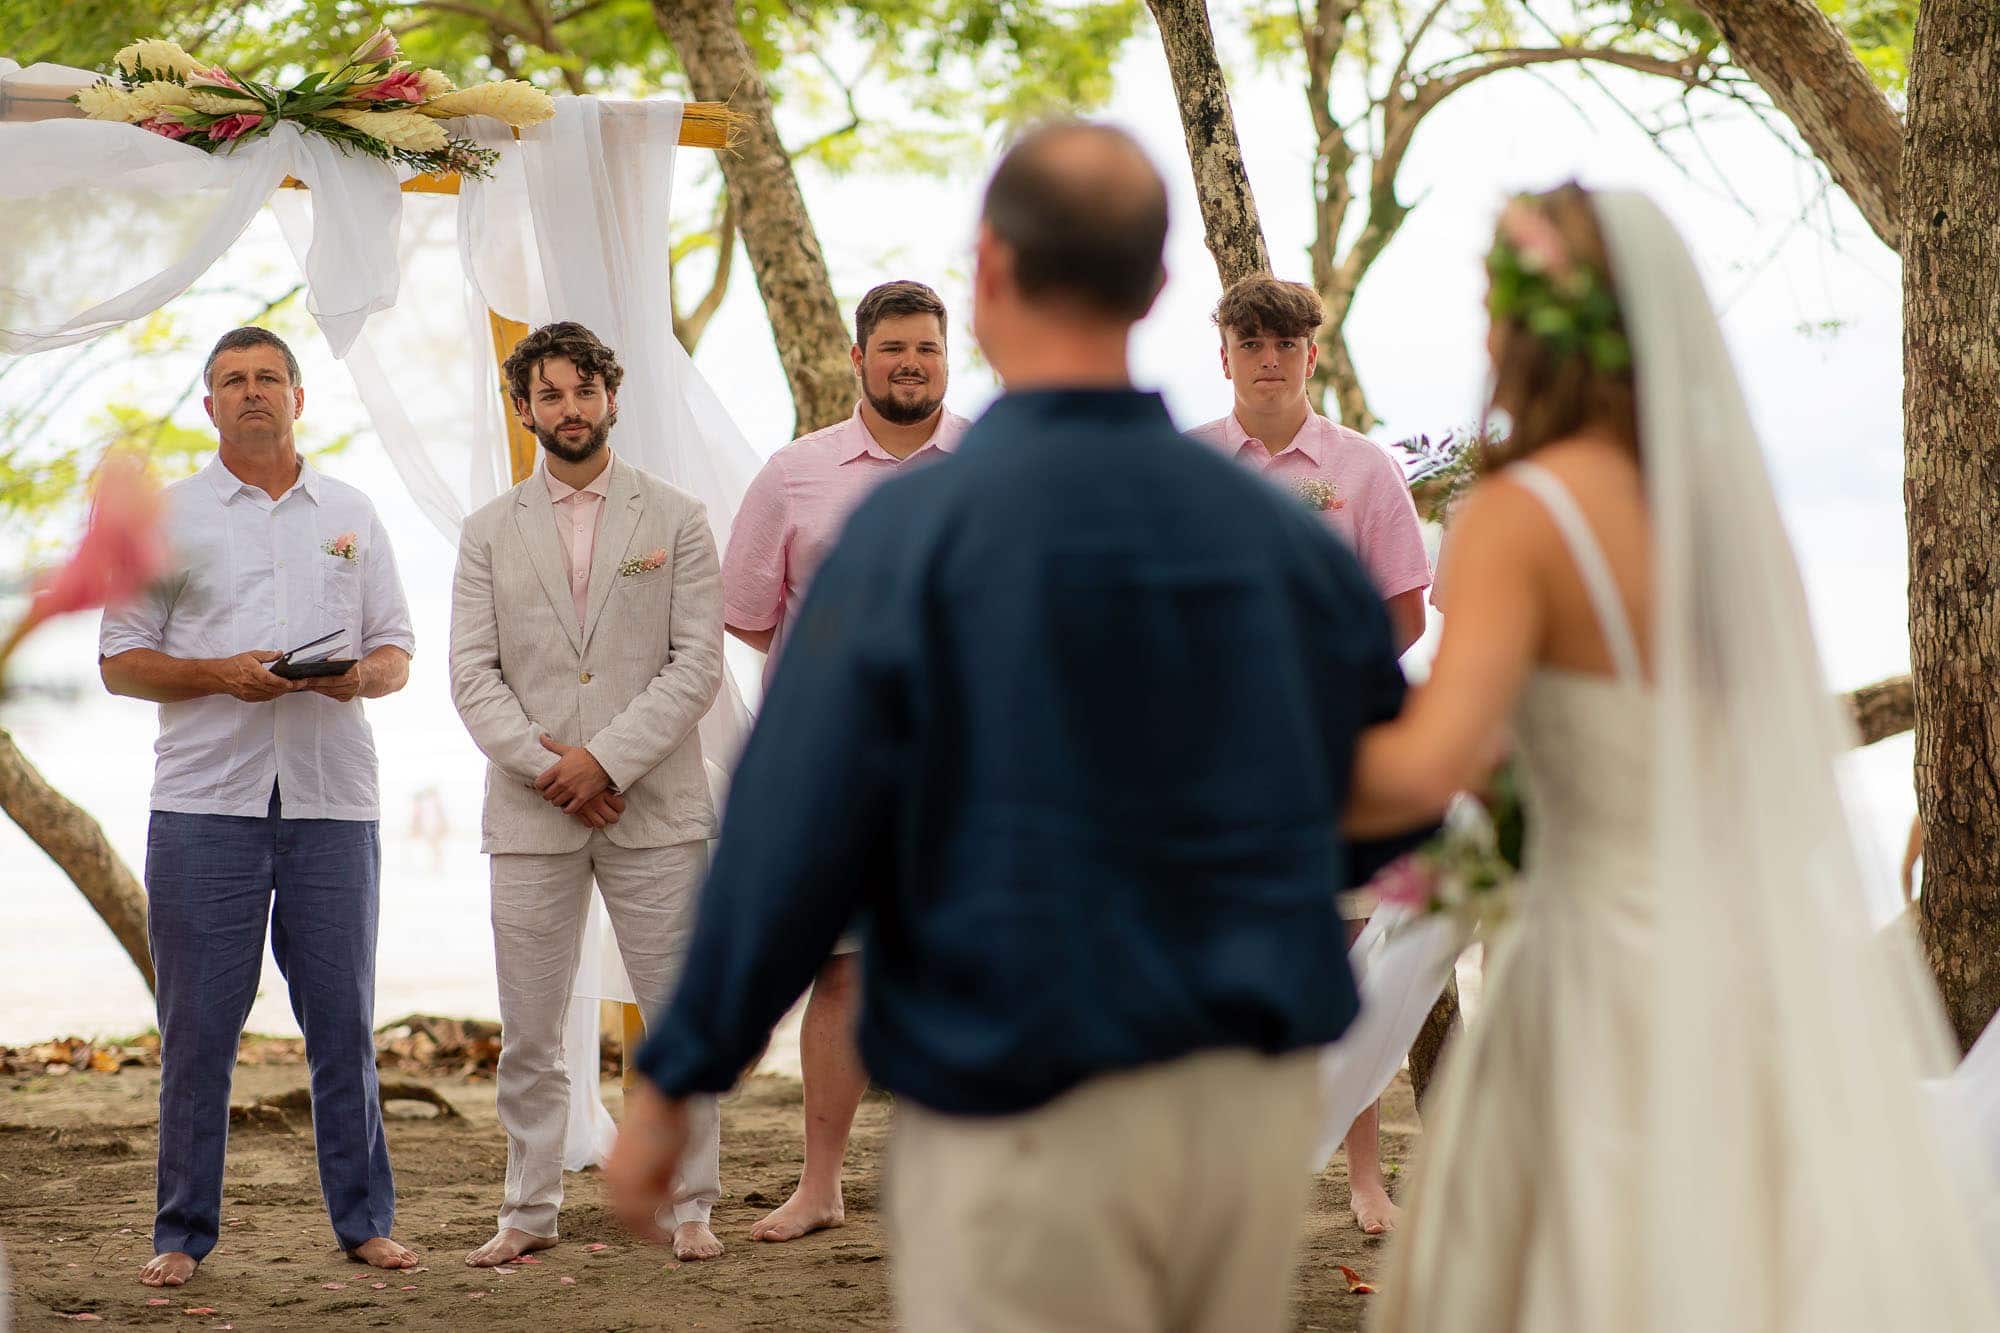 second photographer angle of groom seeing bride walk down aisle